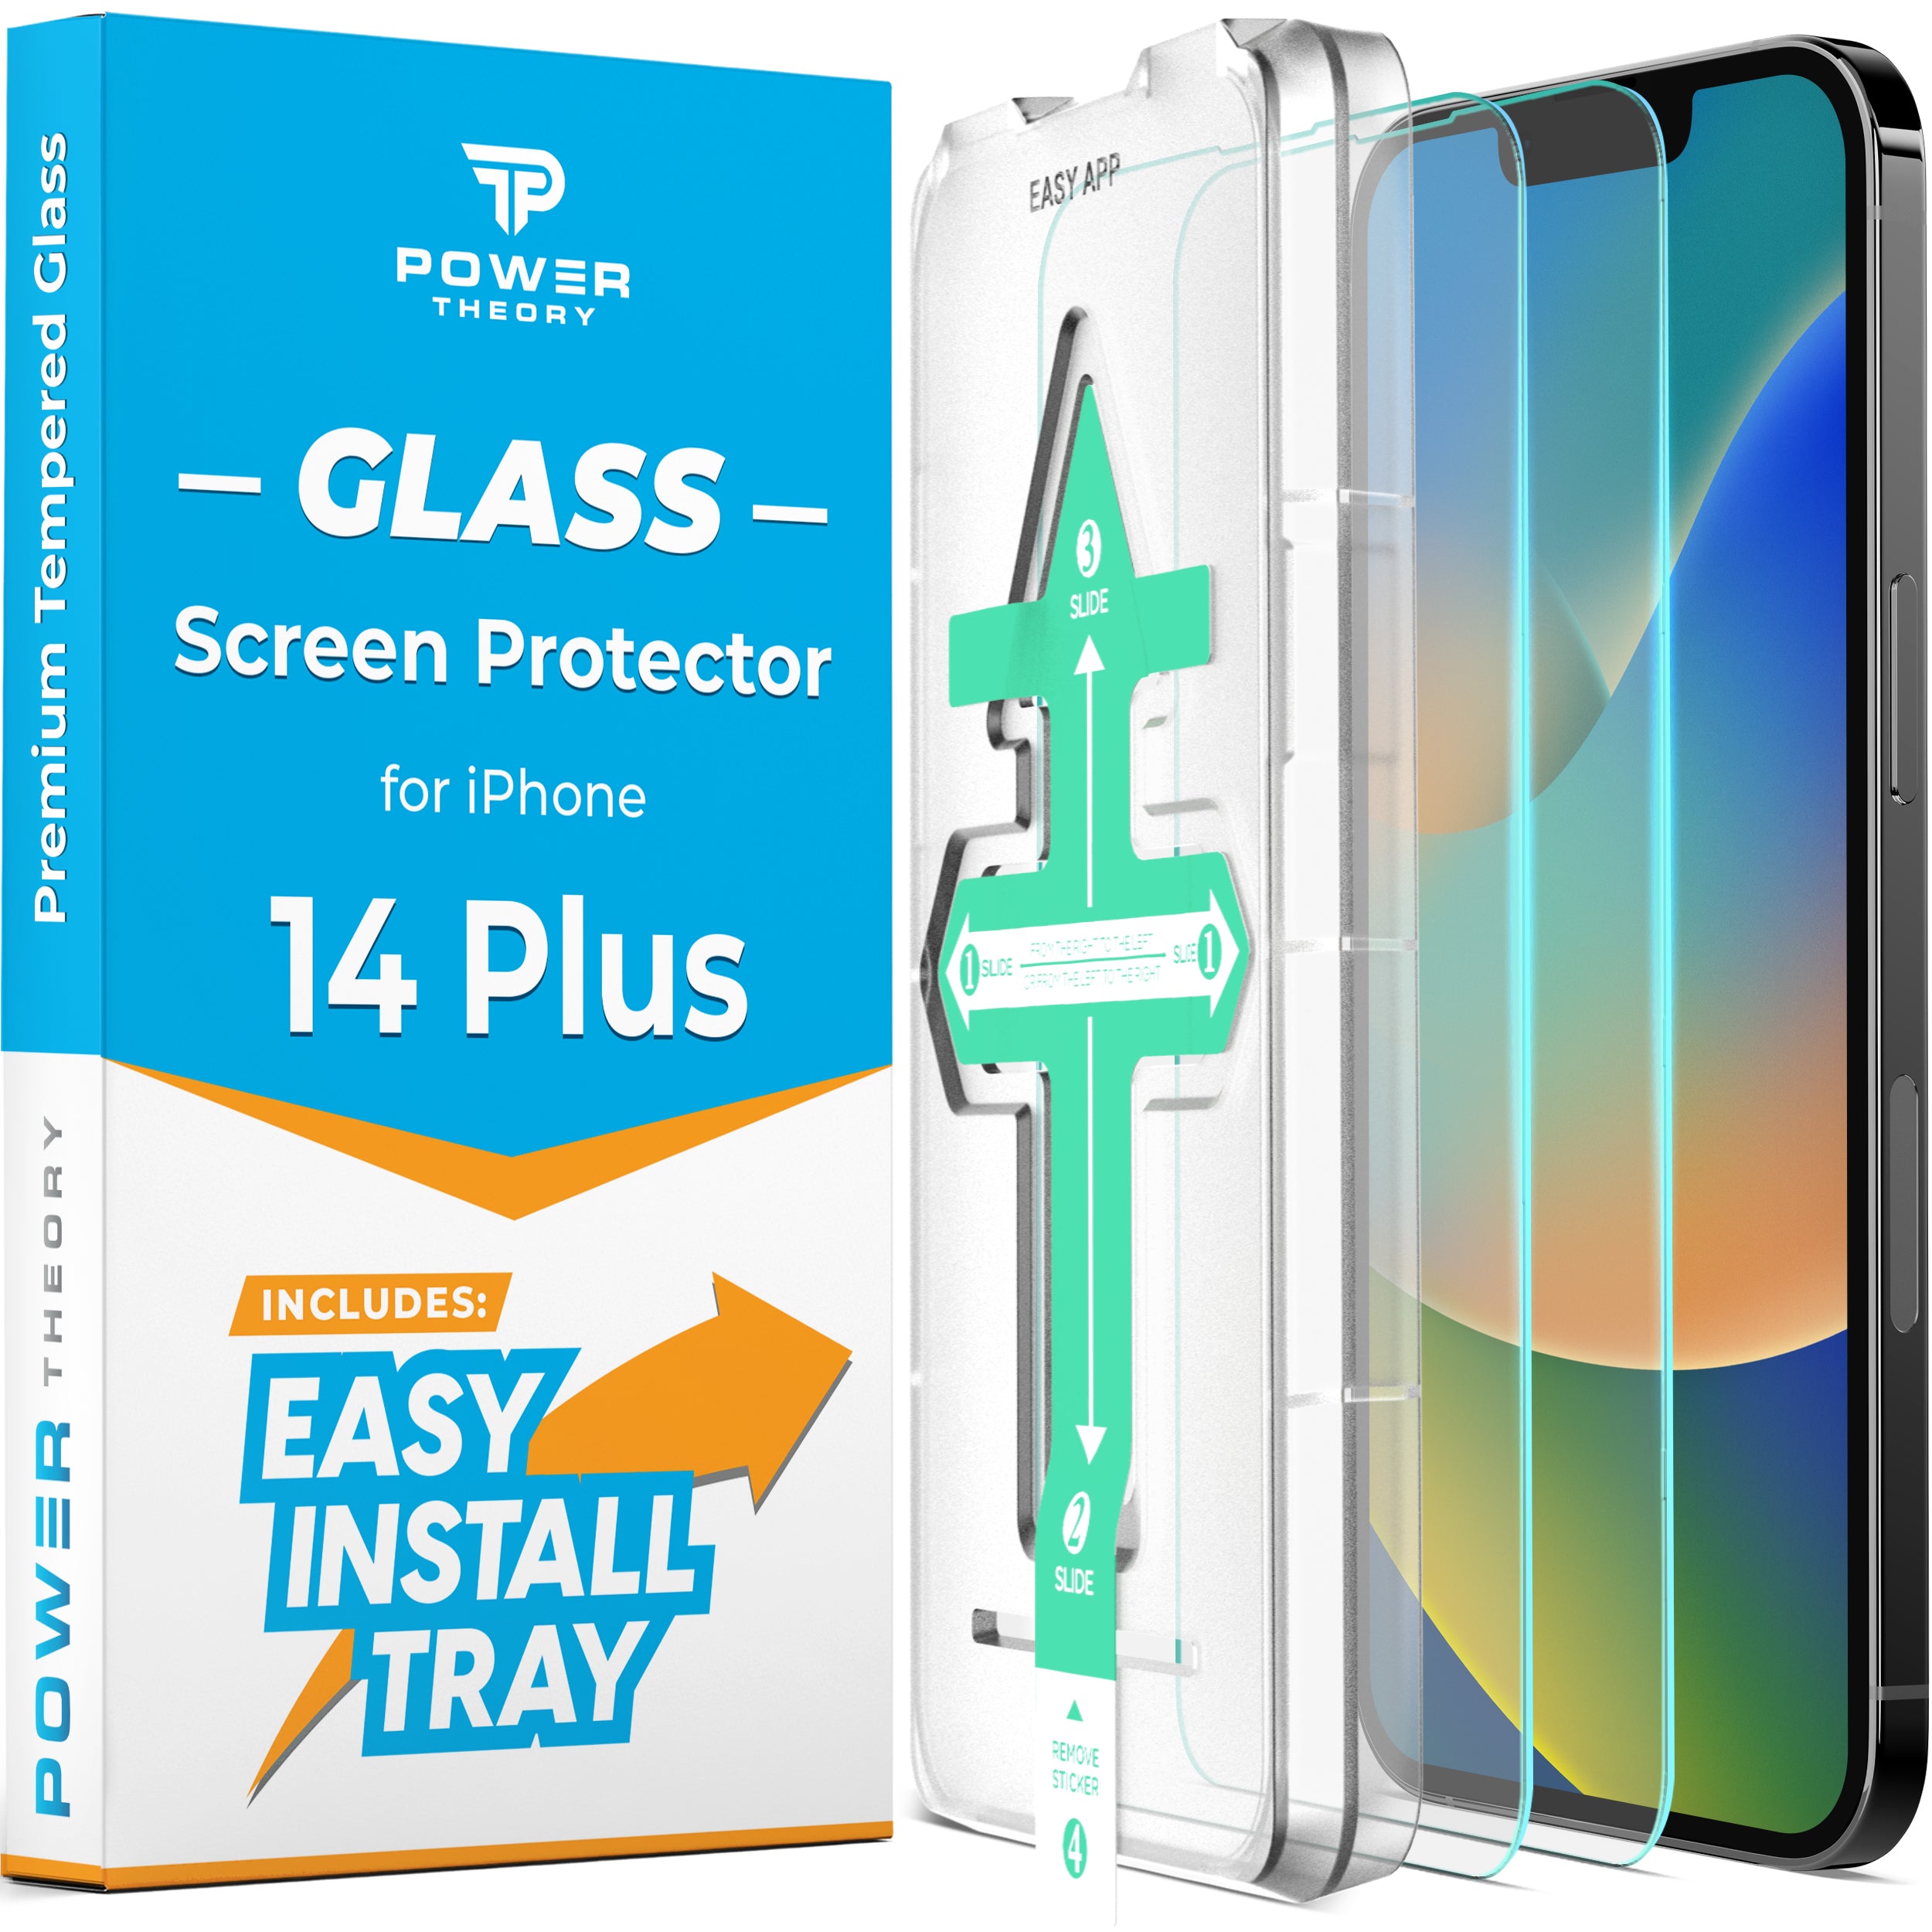 How To Remove A Tempered Glass iPhone Screen Protector